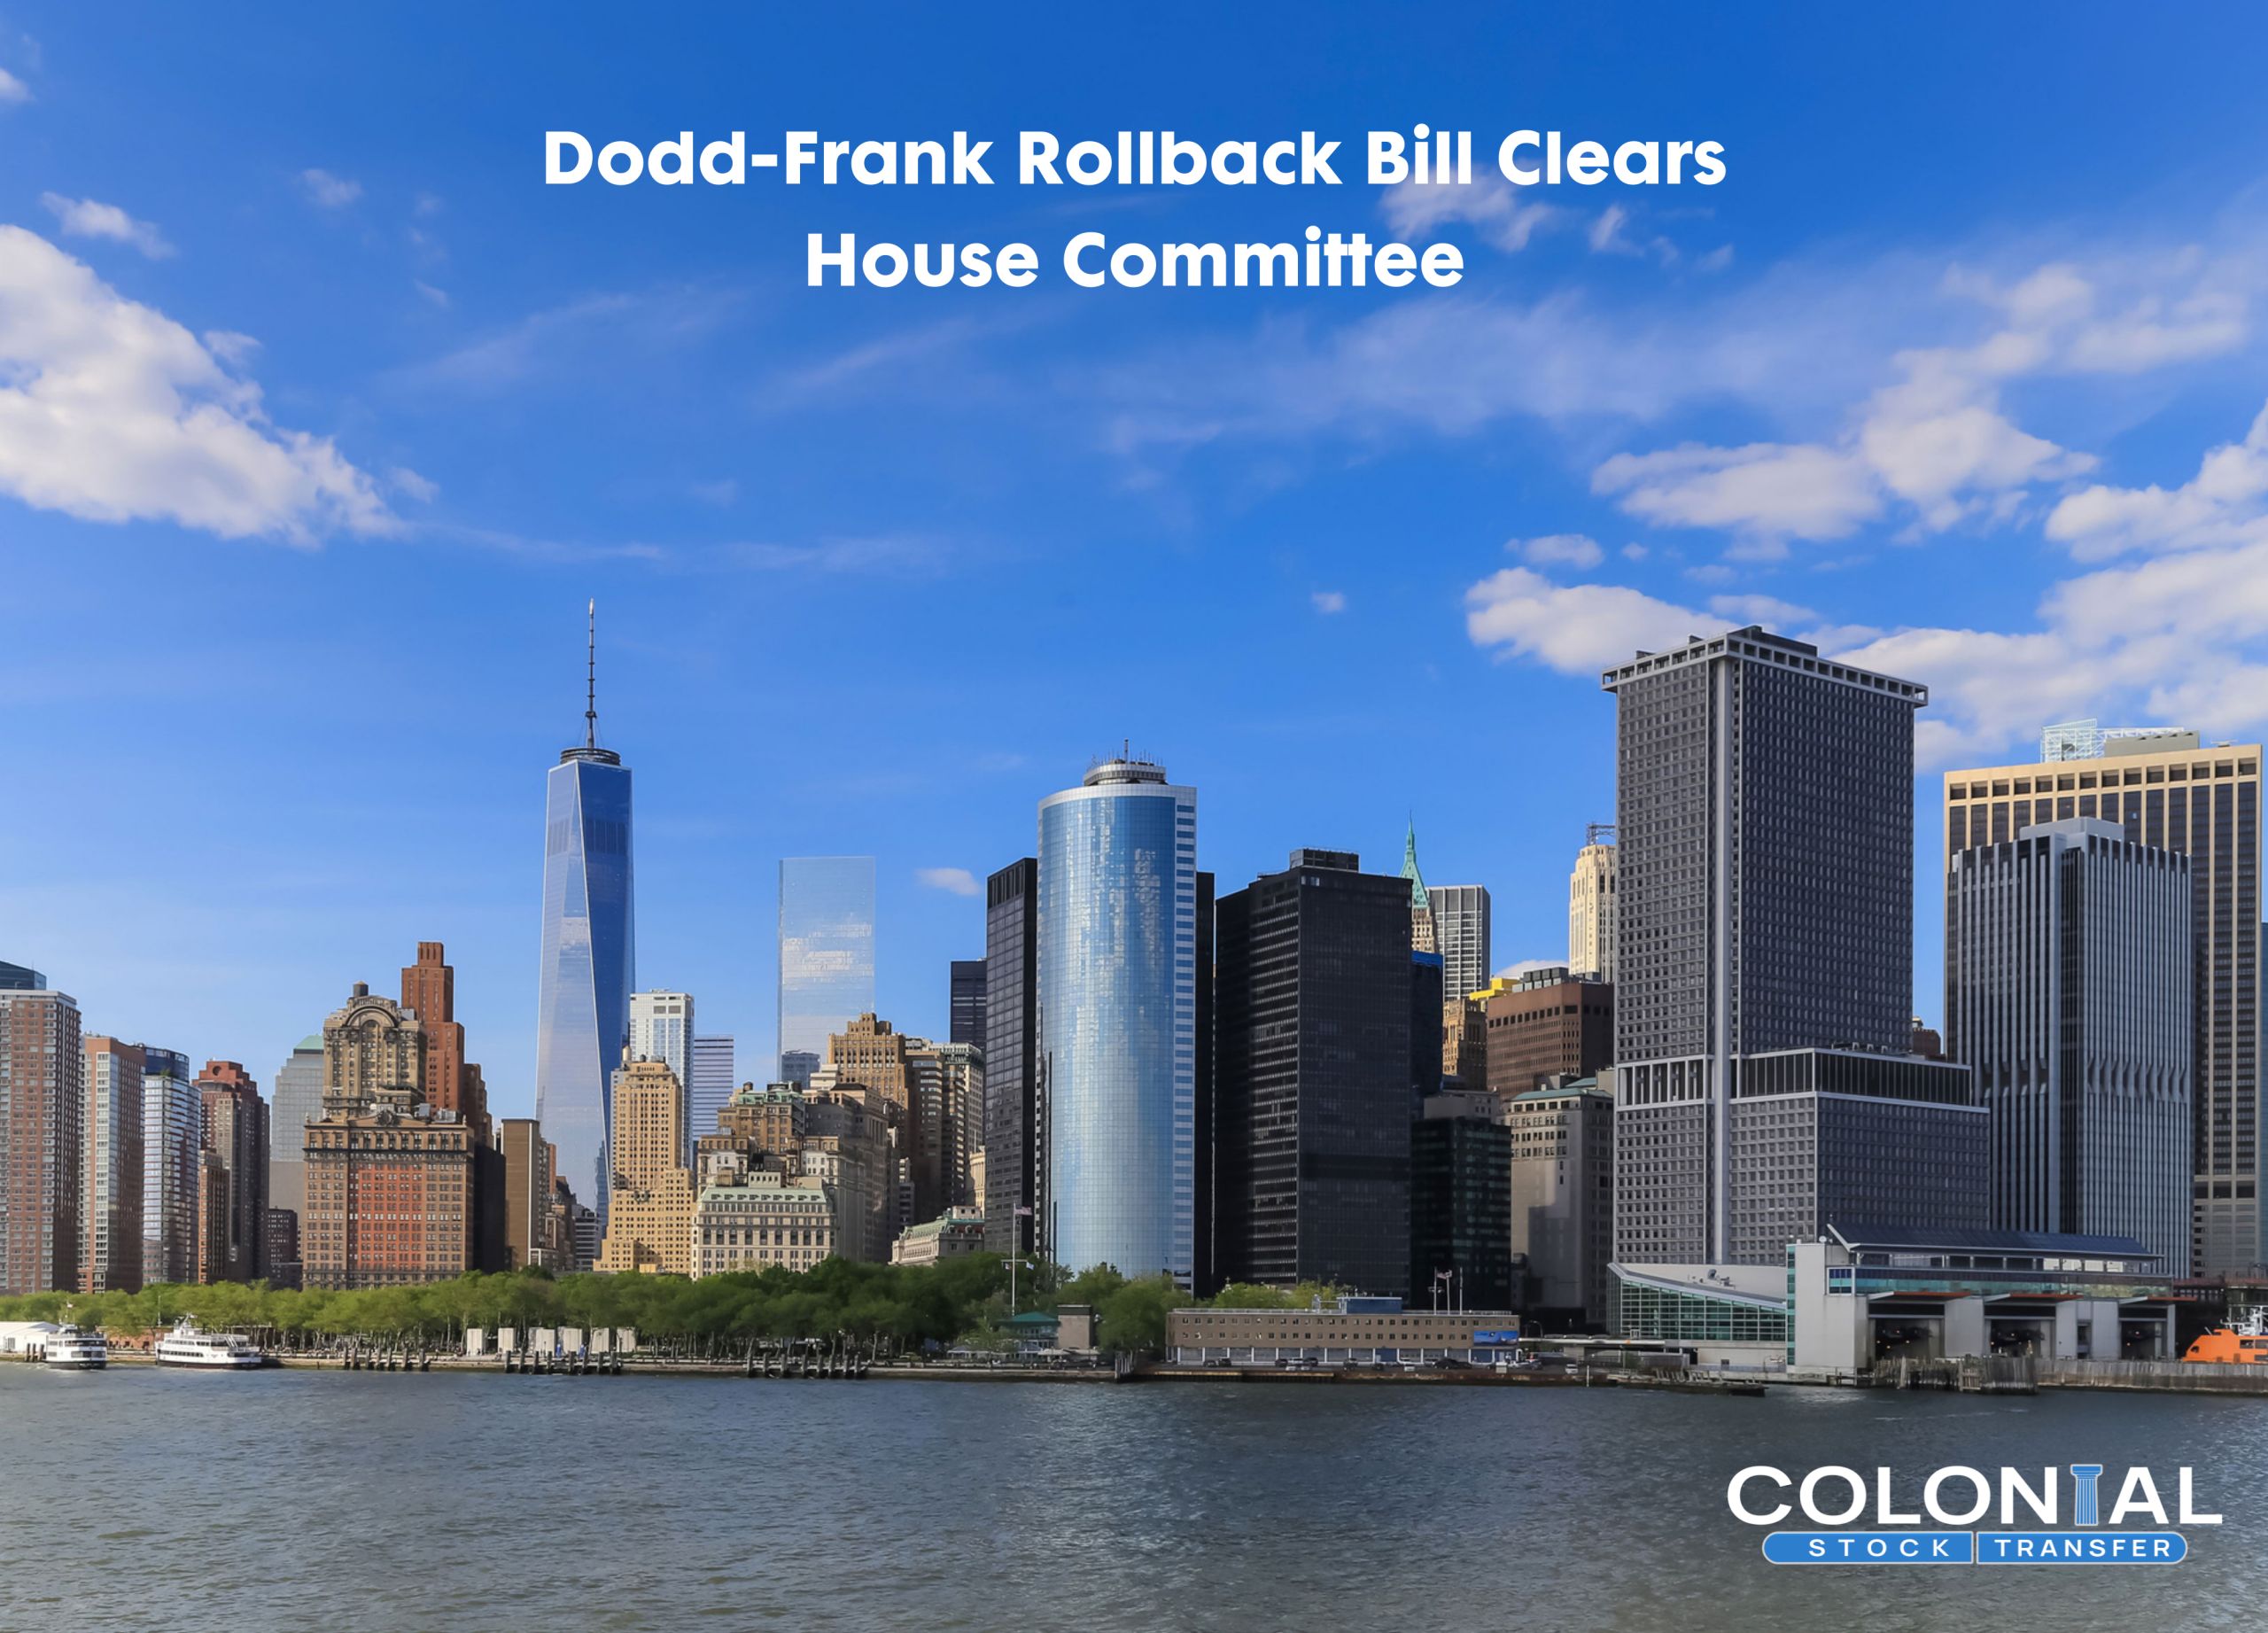 Dodd-Frank Rollback Bill Clears House Committee